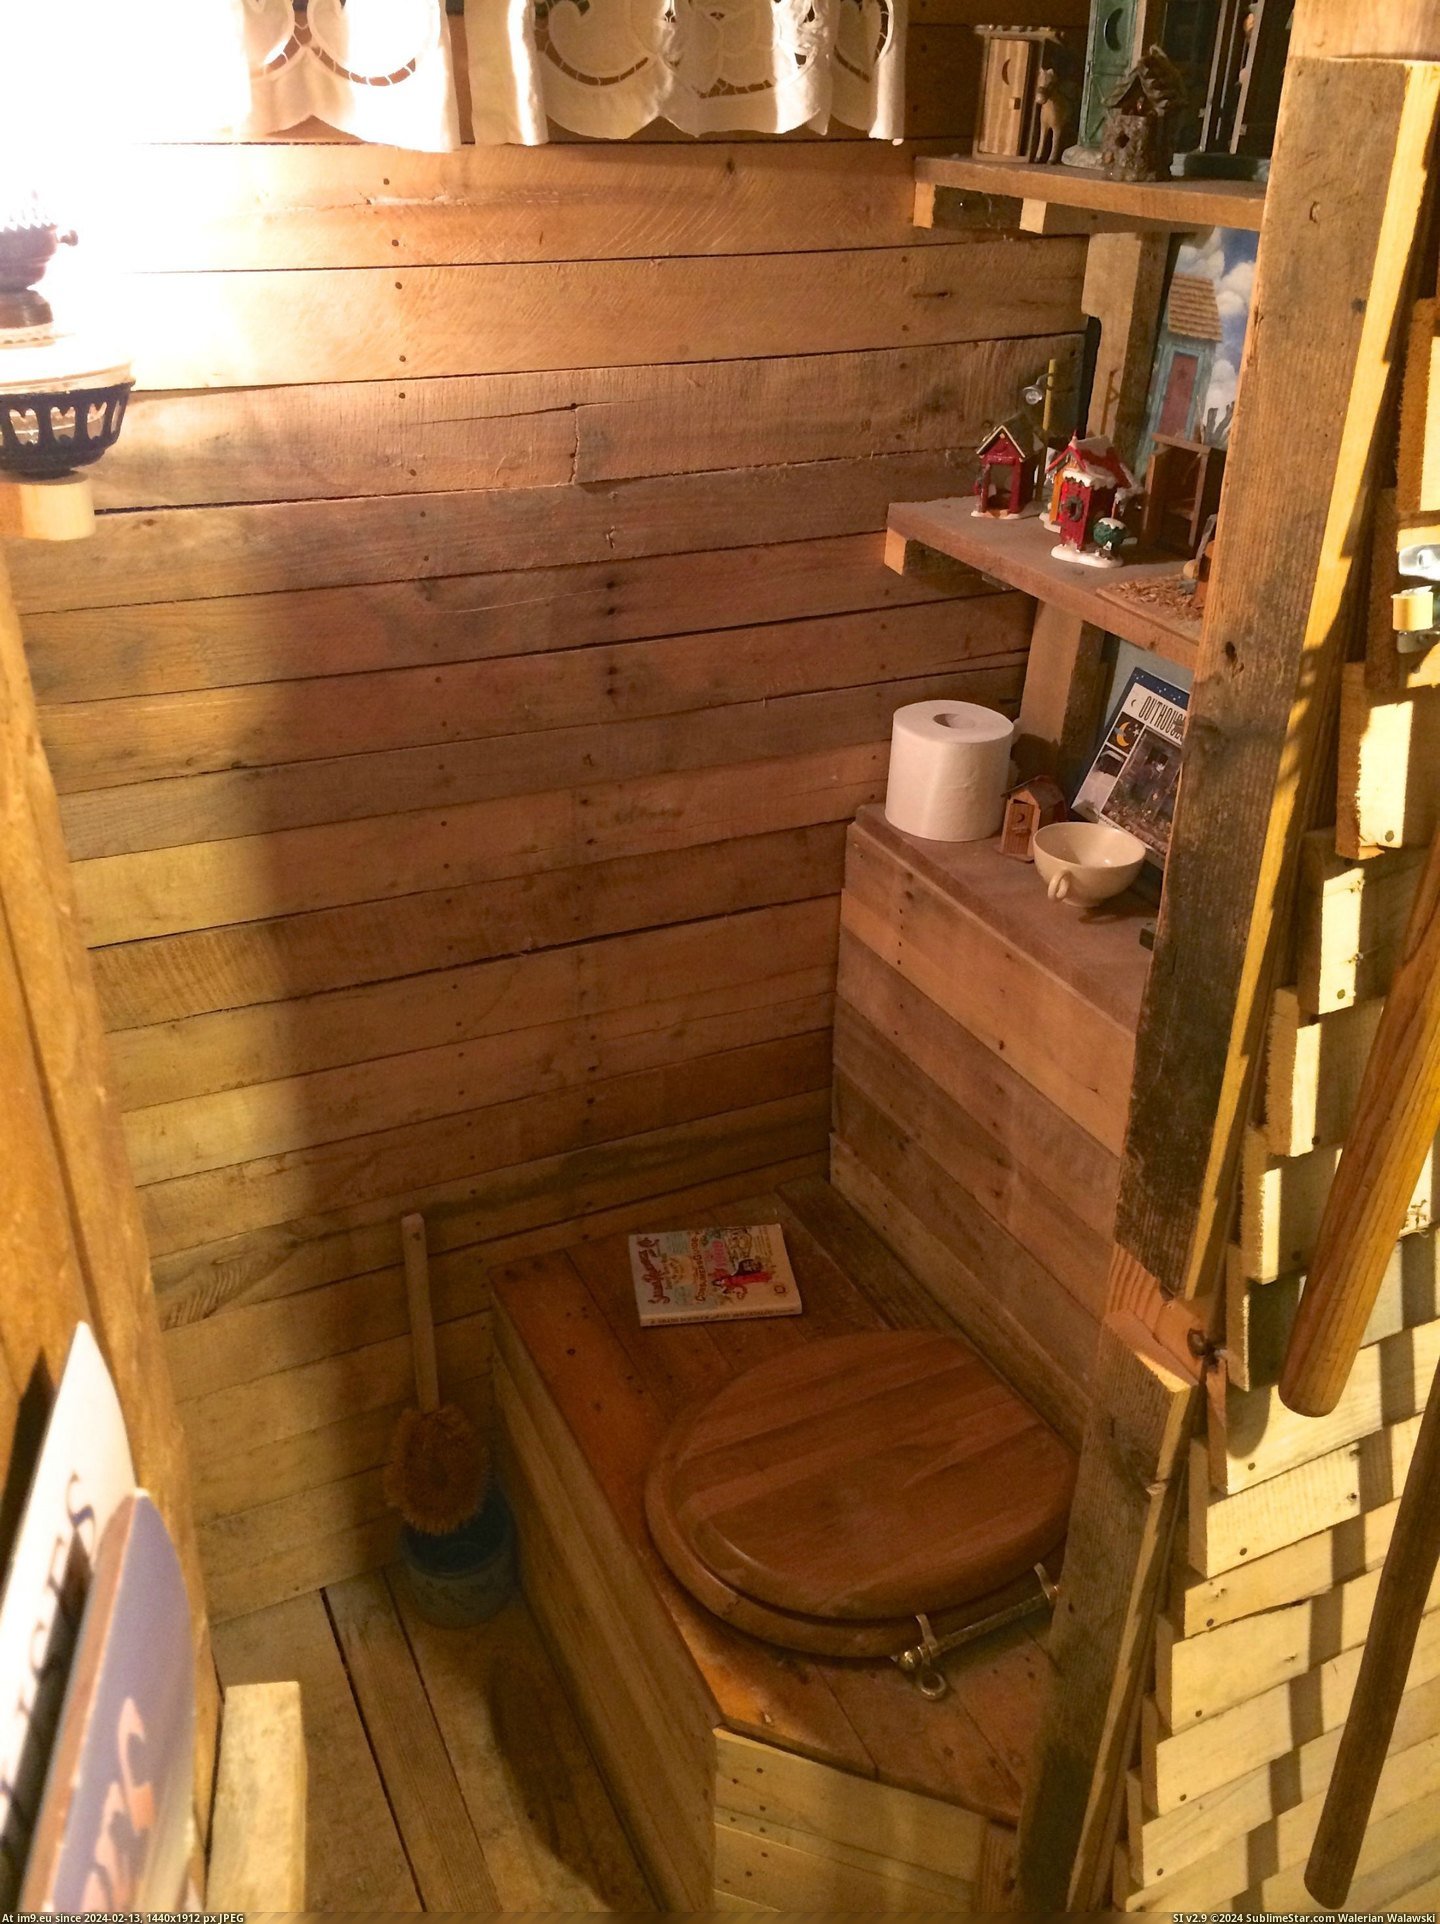 #Guys #Dad #Isn #Basement #Told #Built [Pics] My dad isn't on Reddit, but I told him you guys would appreciate the outhouse he built in their basement. 8 Pic. (Bild von album My r/PICS favs))